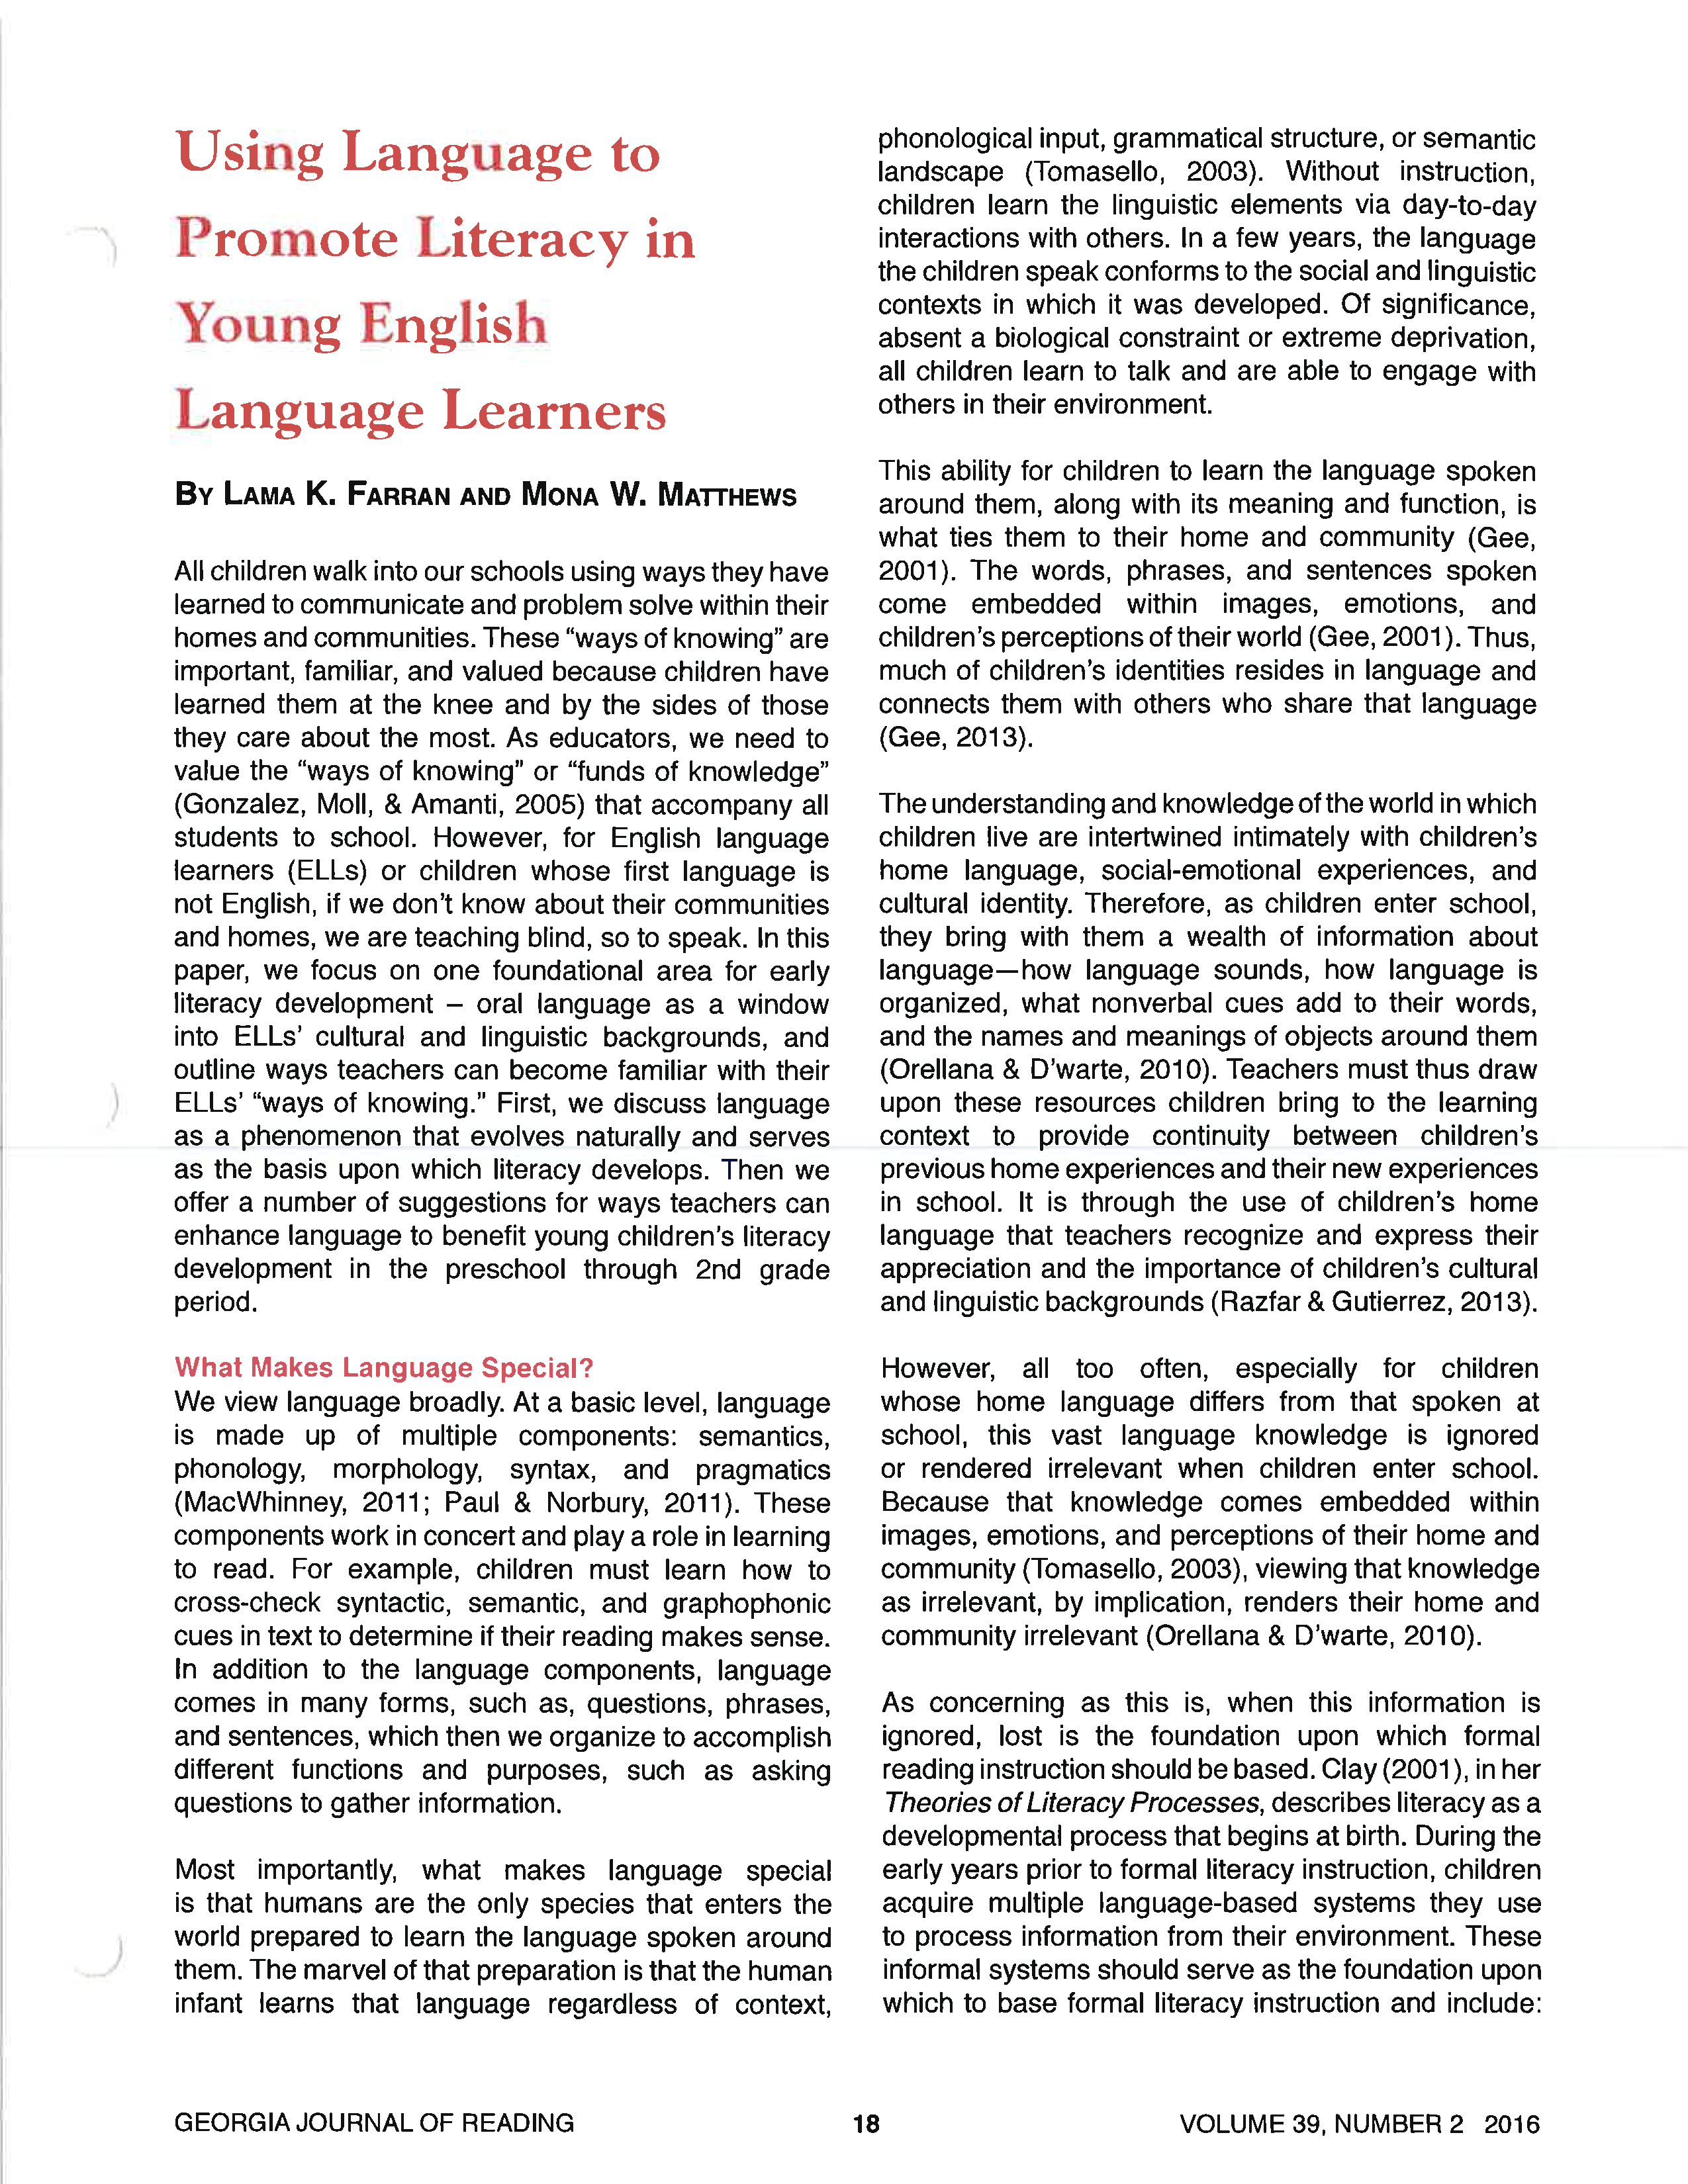 Using Language to Promote Literacy in Young English Language Learners